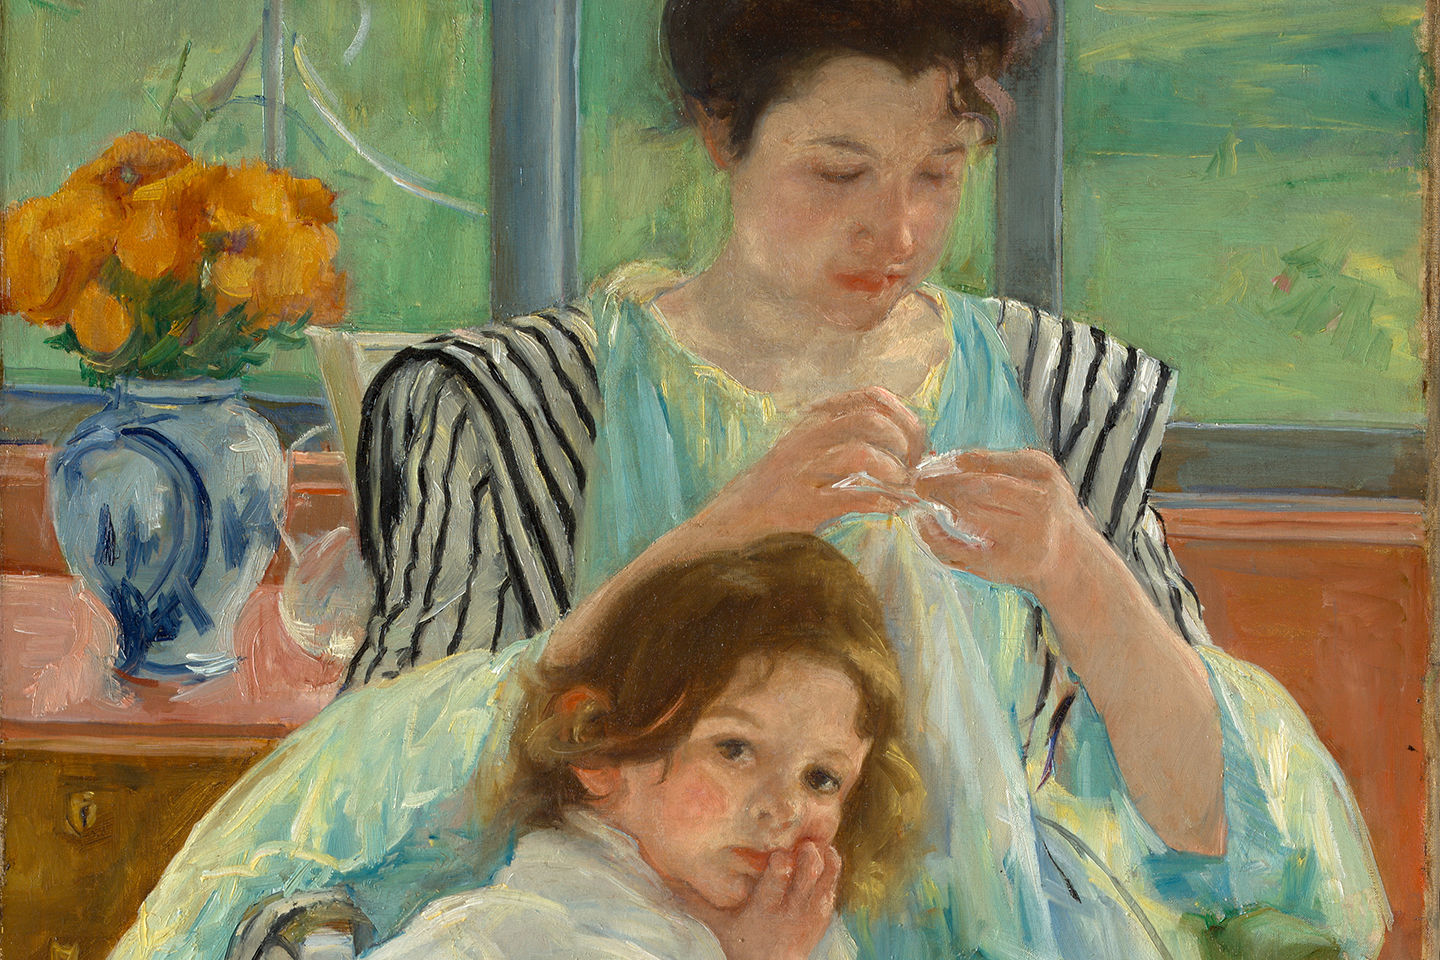 Detail of Mary Cassatt’s painting of a young mother sewing with a child resting on her lap; the room has a vase of vibrant flowers and a bay of windows overlooking a green wooded area.